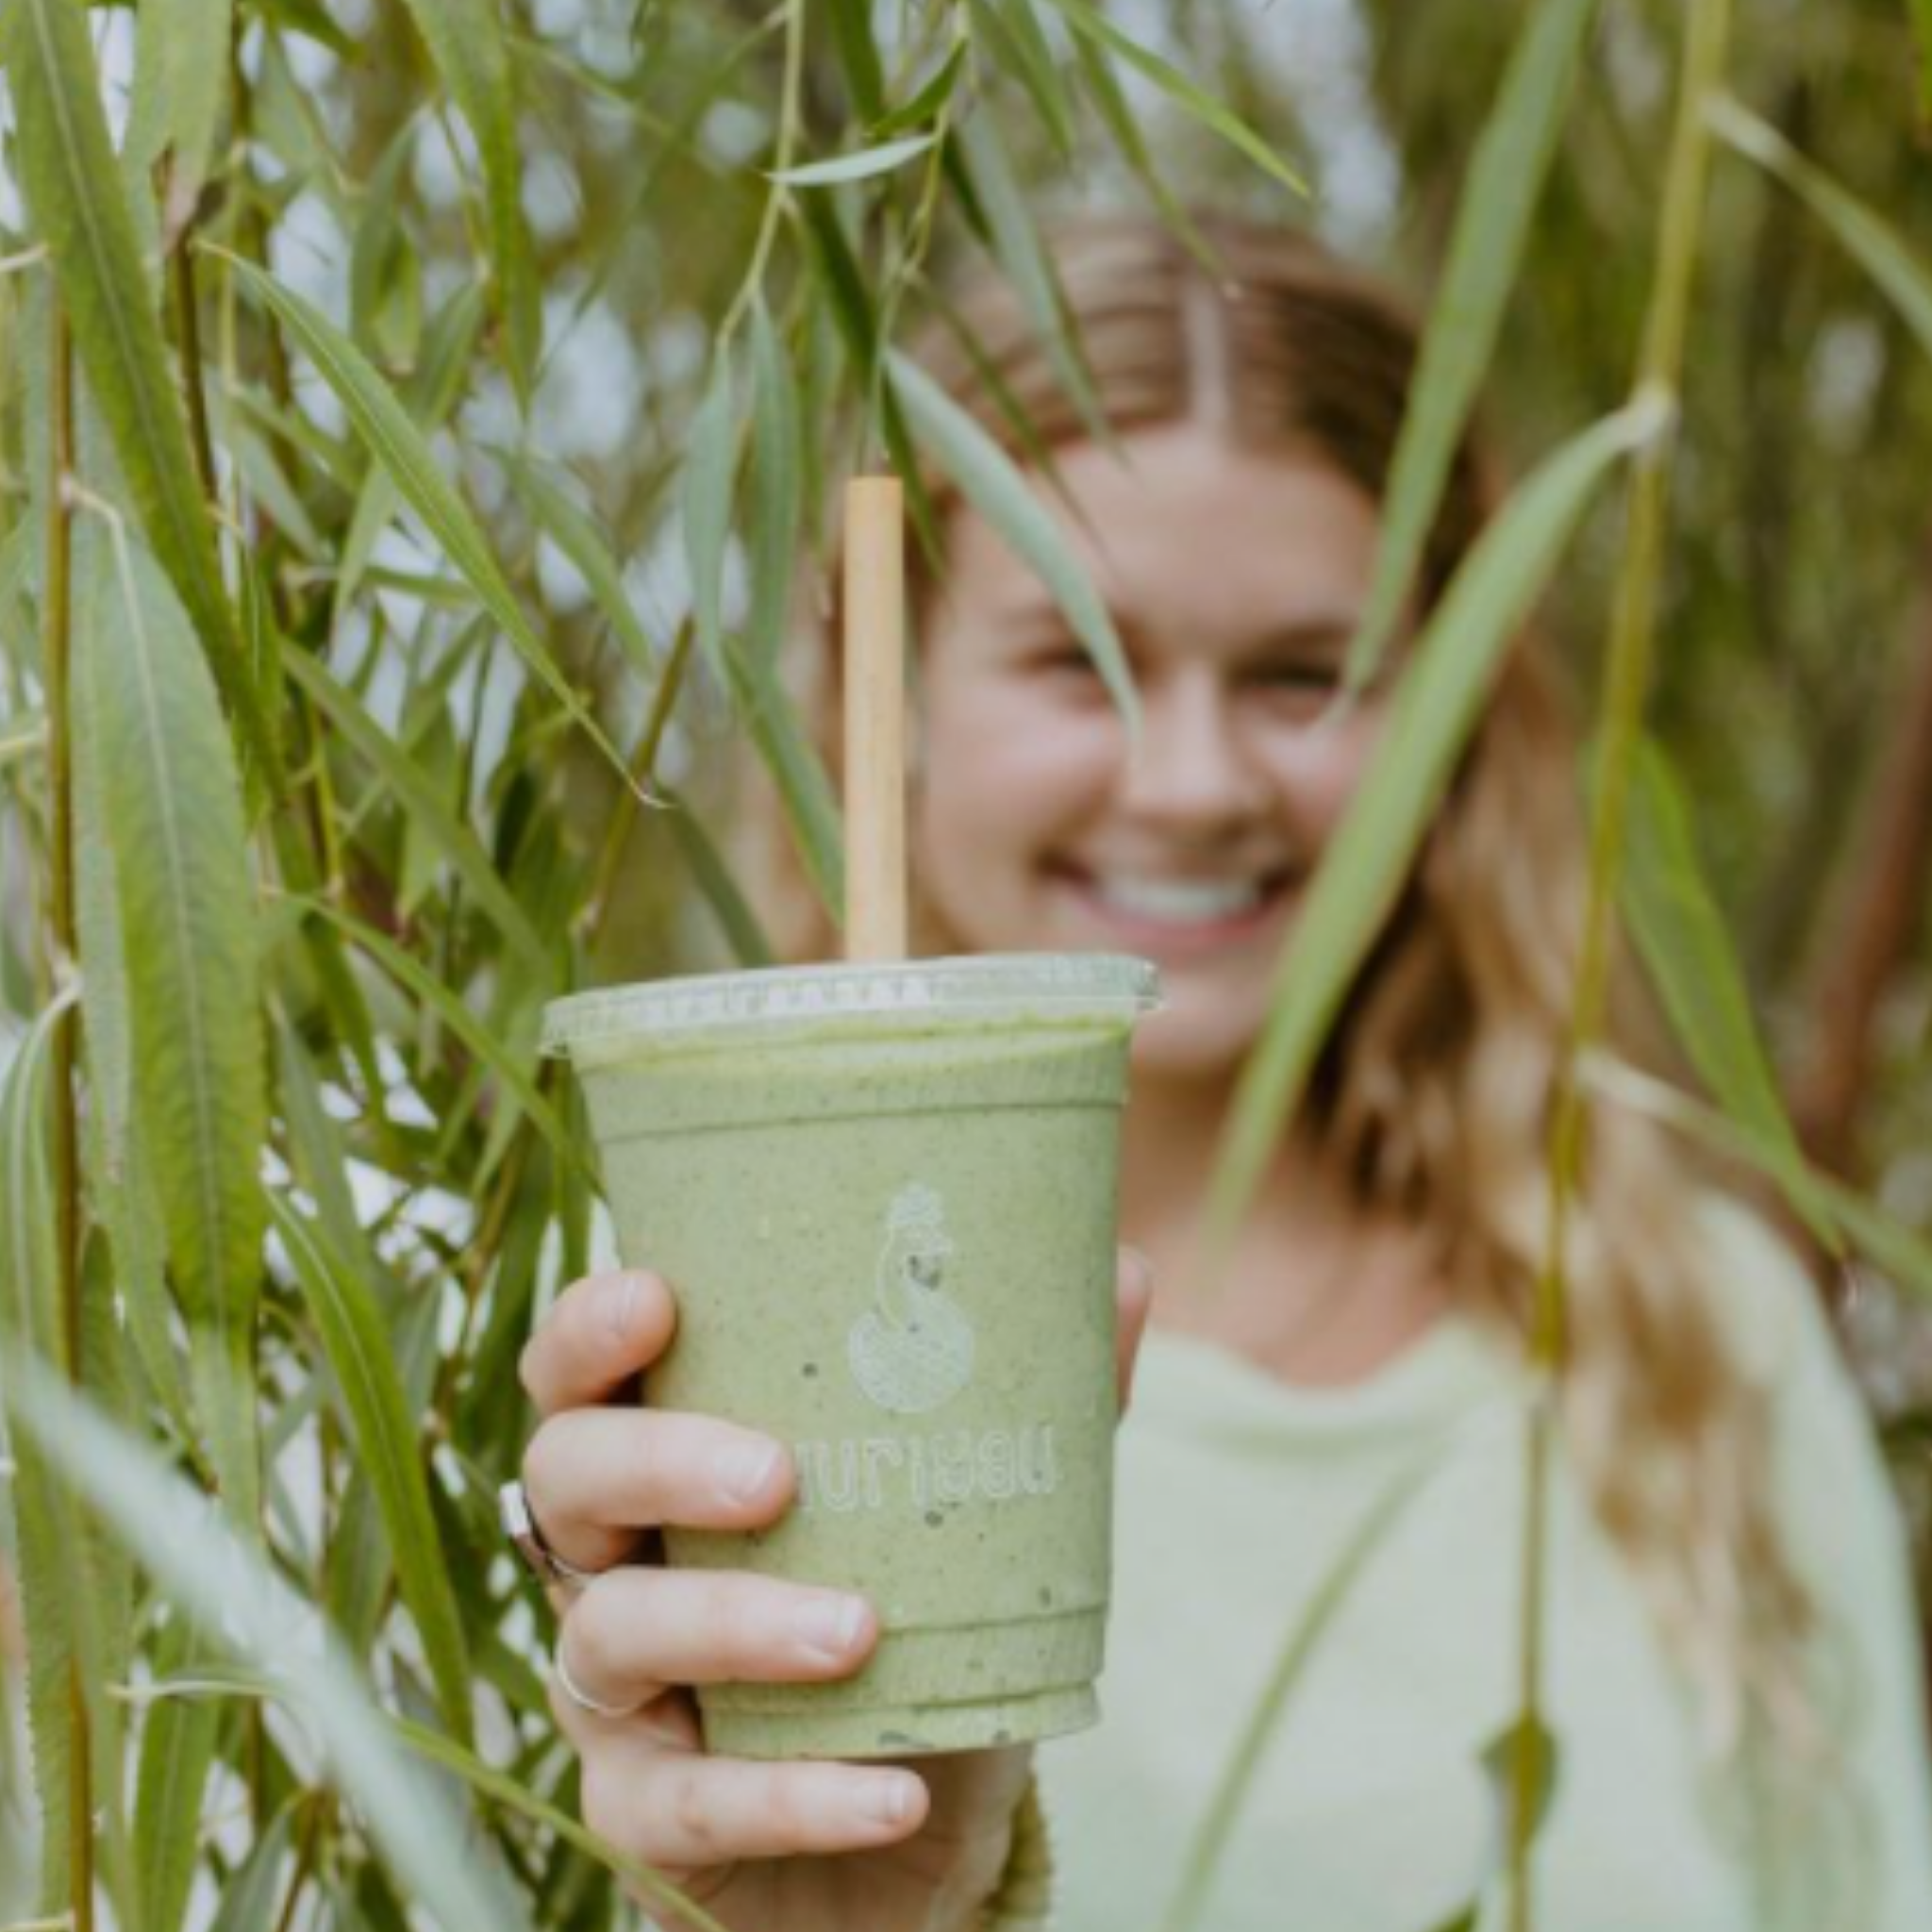 Girl holding a green smoothie through palm trees highlighting the reed straw